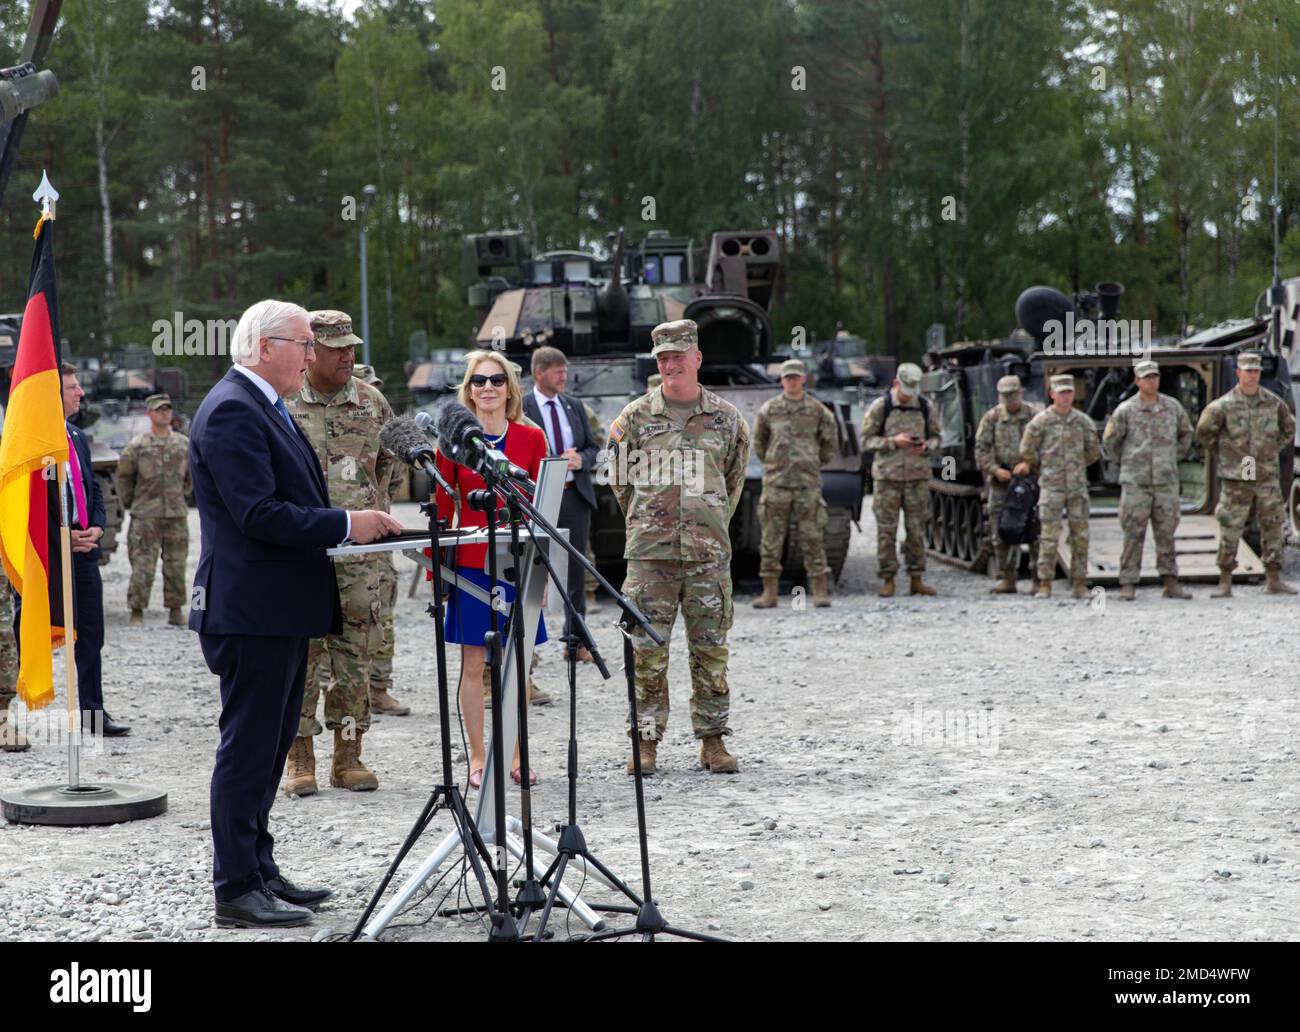 German President Frank-Walter Steinmeier addresses Soldiers of the 3rd Infantry Division's 1st Armor Brigade, during a visit to 7th Army Training Command's Grafenwoehr Training Area, July 13, 2022. President Steinmeier traveled to 7 ATC to thank U.S. troops for their contributions to the freedom and security of Germany and its NATO allies in Europe, while also paying tribute to the importance of the transatlantic partnership between the U.S. and Germany. (Army photo by Sgt. Spencer Rhodes, 53rd Infantry Brigade Combat Team) Stock Photo